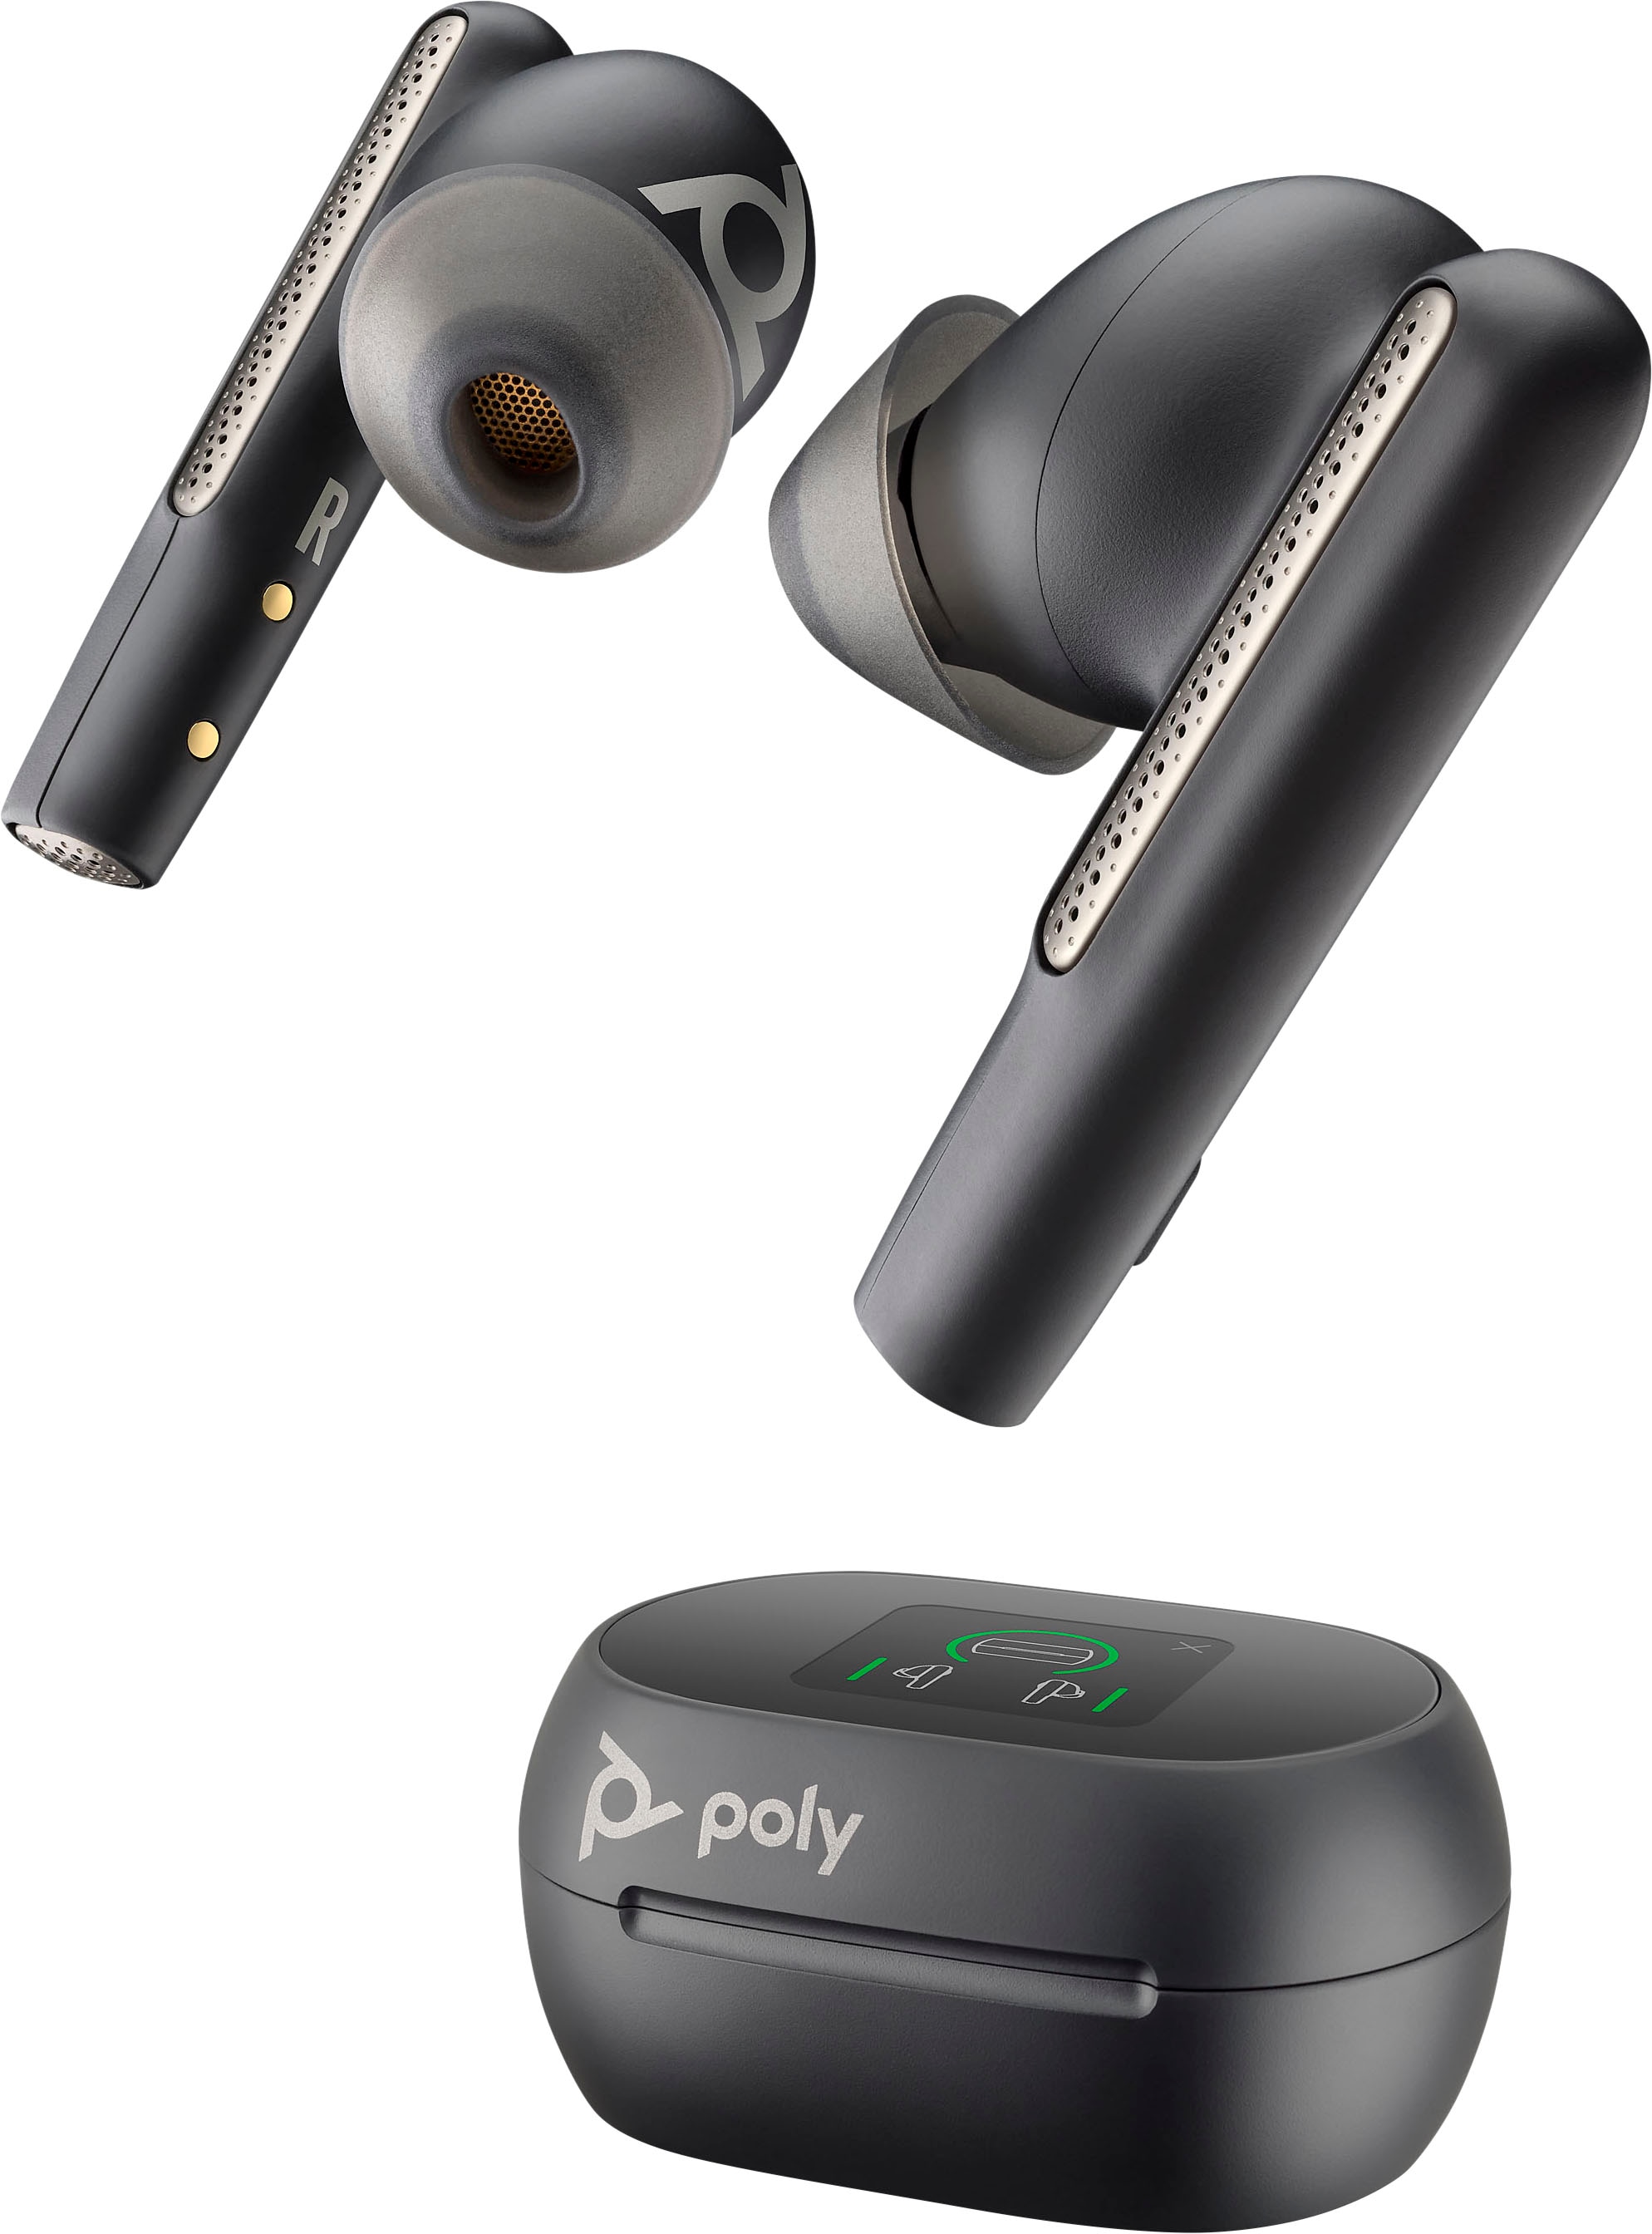 Poly wireless Jahre ➥ UC »Voyager USB-C/A UNIVERSAL (ANC), In-Ear-Kopfhörer | XXL 60+«, Free Garantie Cancelling 3 Noise Active